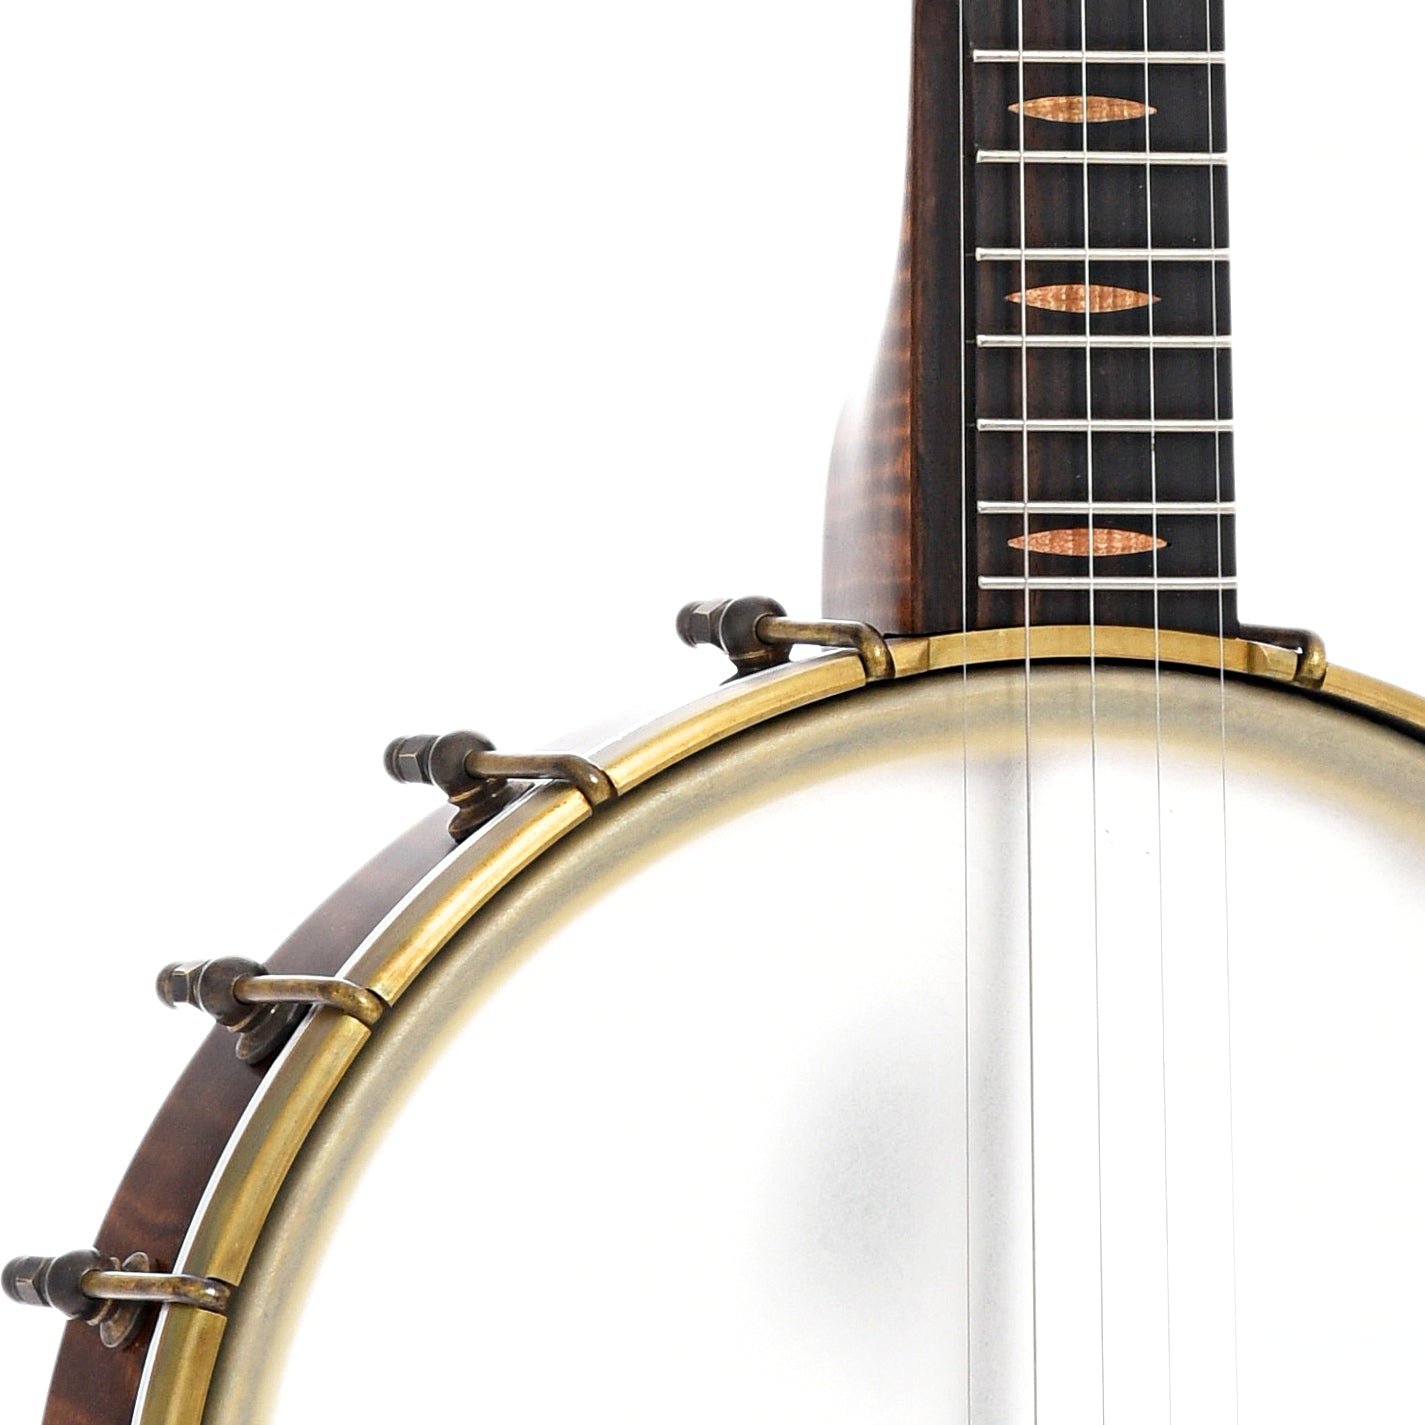 Front body and neck join of Curly Maple Pattison 11" Tubaphone Banjo